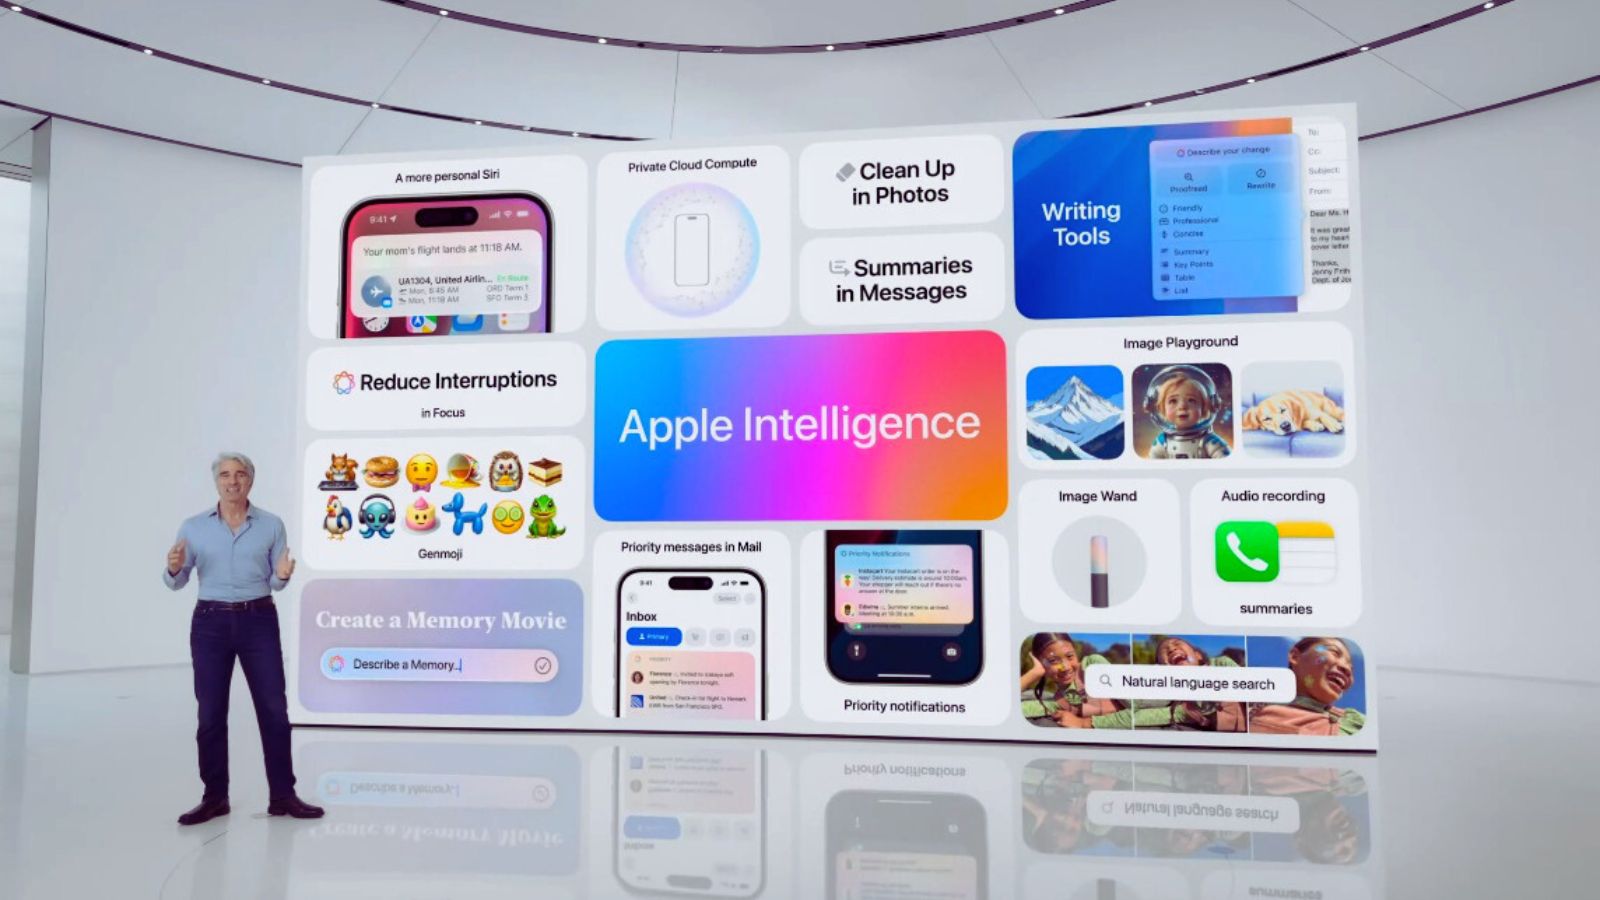 As Apple aims to monetise AI, select Apple Intelligence features may stay  behind paywall | Technology News - The Indian Express